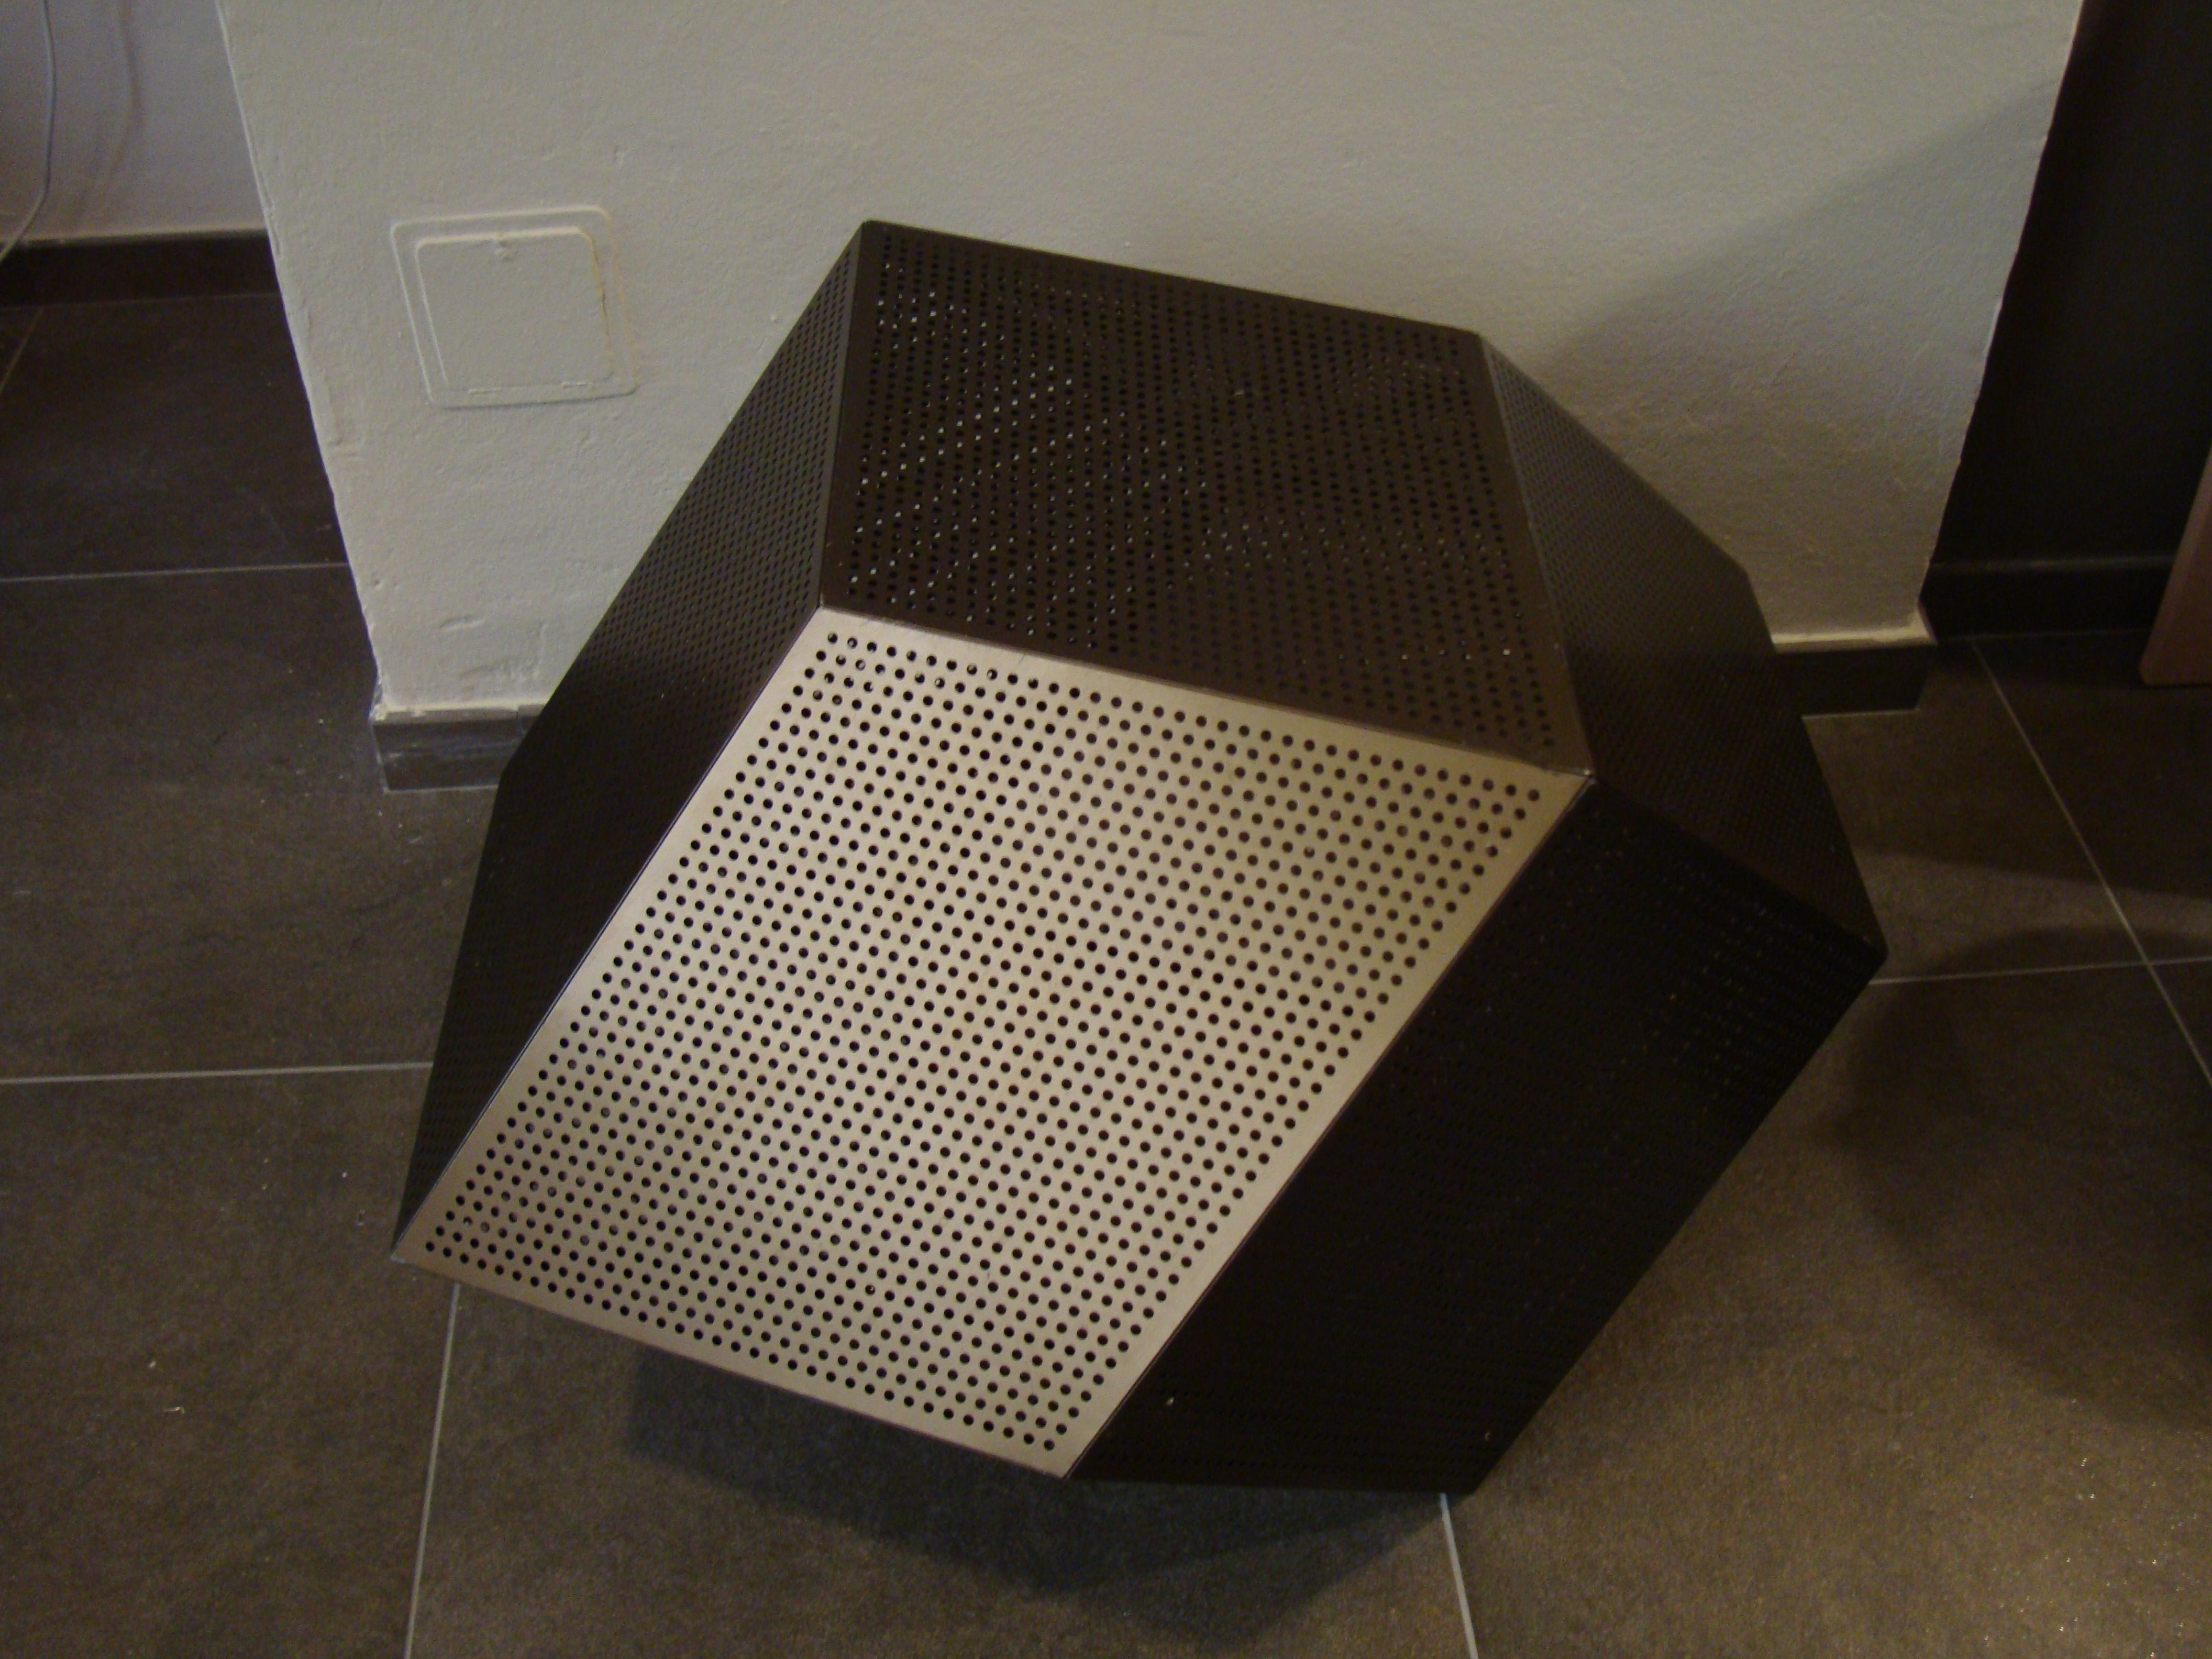 Large pair contemporary polyhedral bases in perforated and painted metal, in the style of Mathieu Mategot, to be used as sofa side table or stools or as lamps creating wiring. Possibly 1980s.